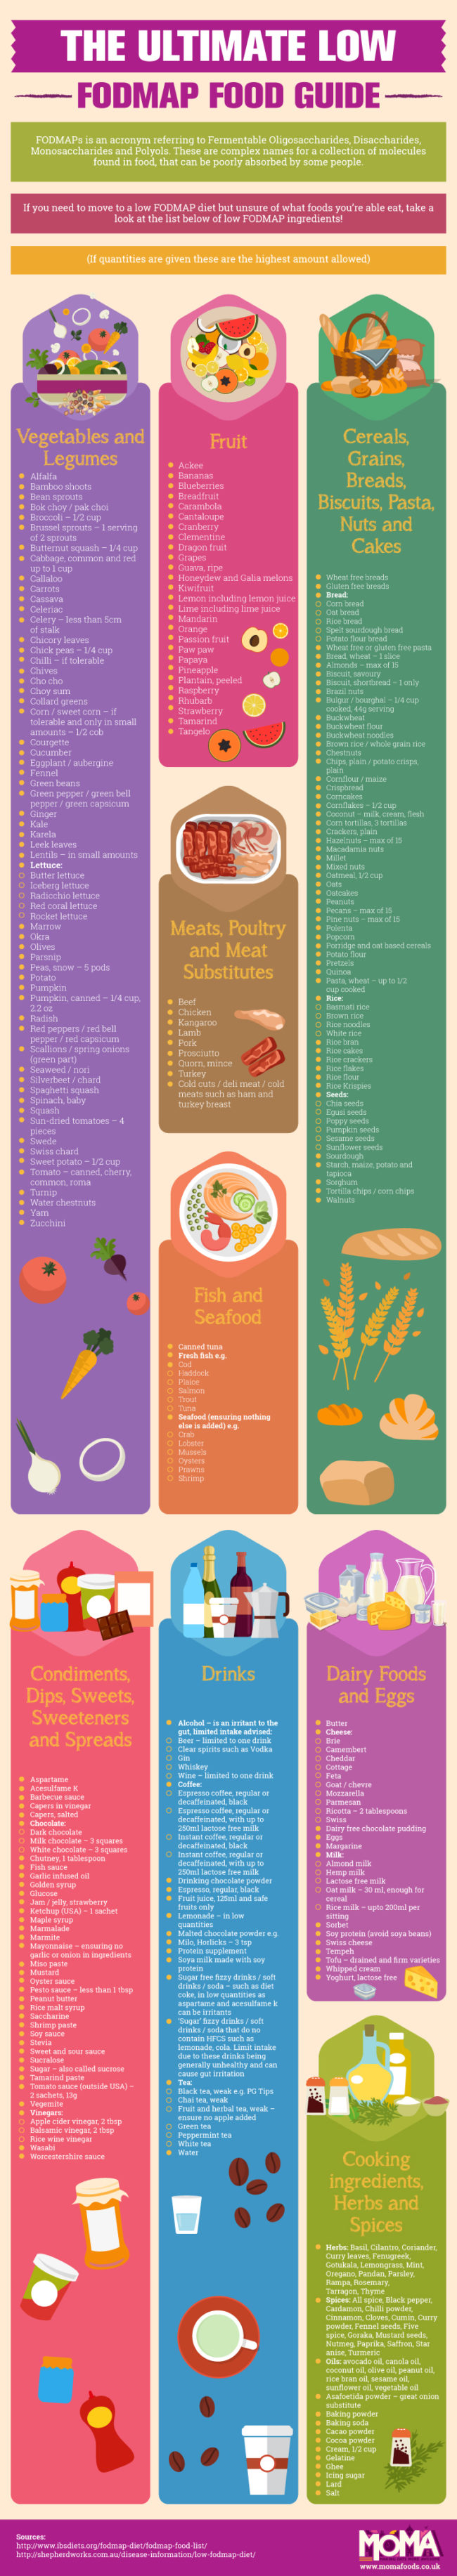 Infographic: The Ultimate Low FODMAP Food Guide